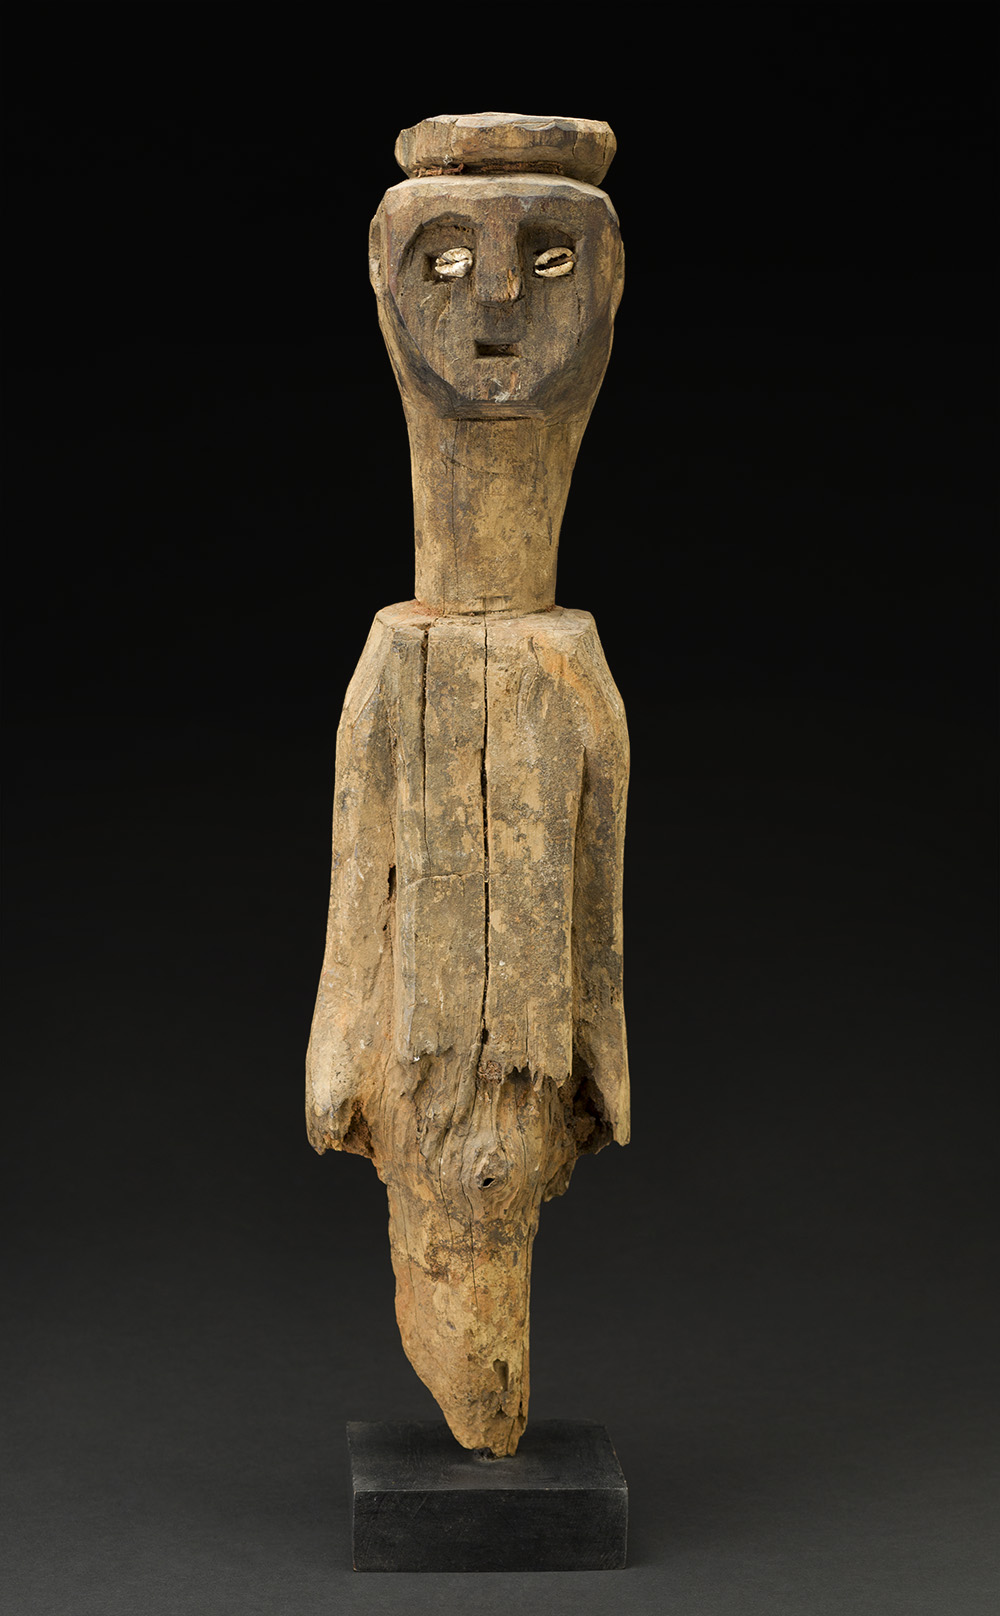   Africa    Bocio - Ewe People - Togo  , Mid. 20th C. Wood, shells, natural materials 19 x 5 x 3 inches 48.3 x 12.7 x 7.6 cm Af 330 